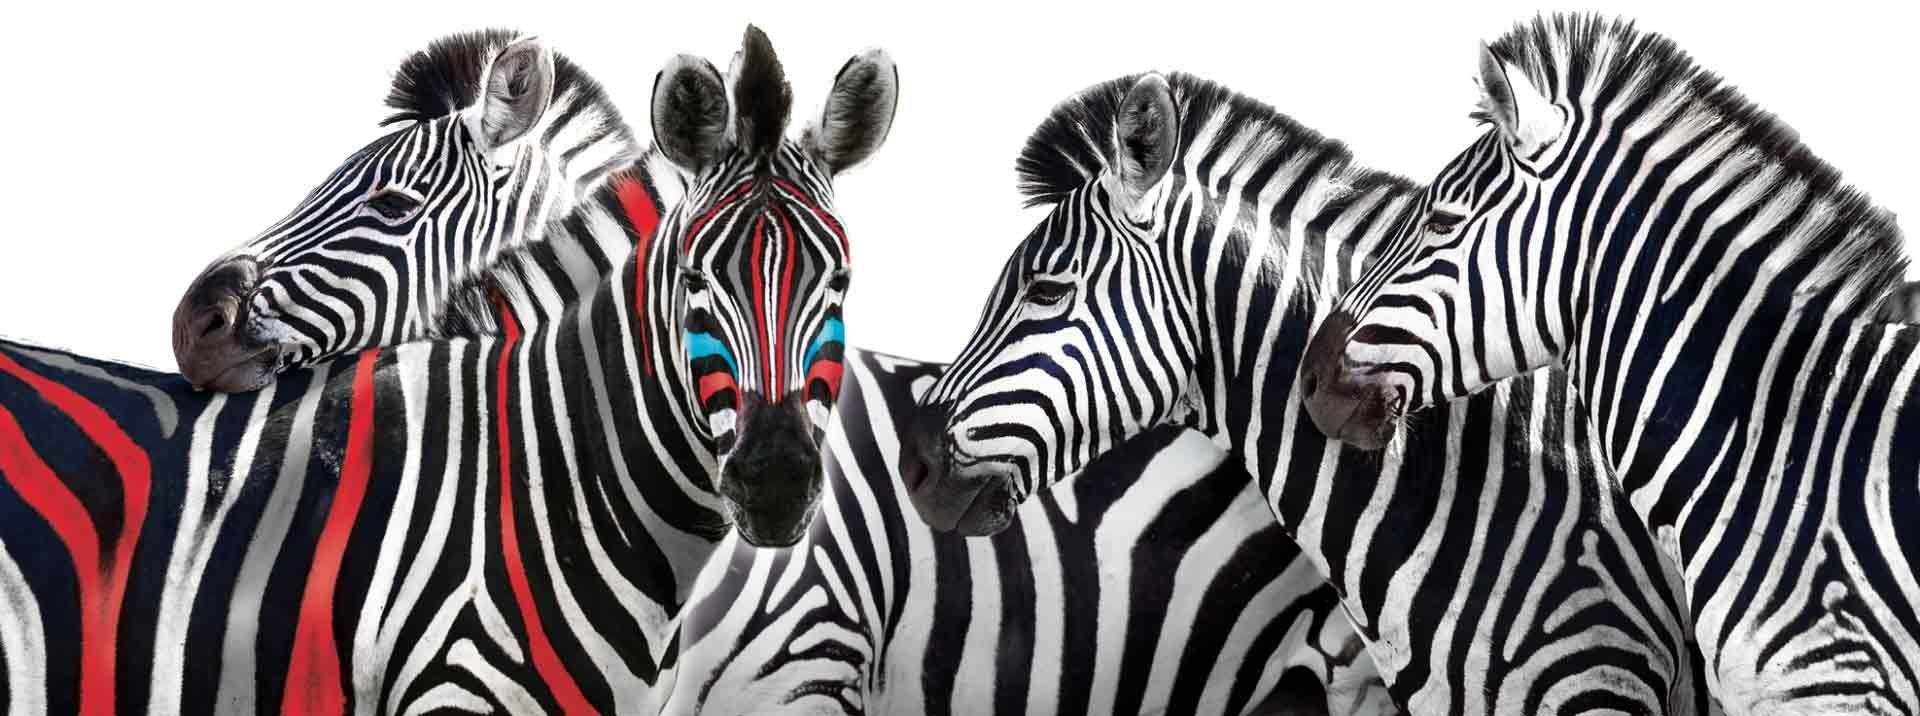 A group of zebras standing next to each other on a white background.